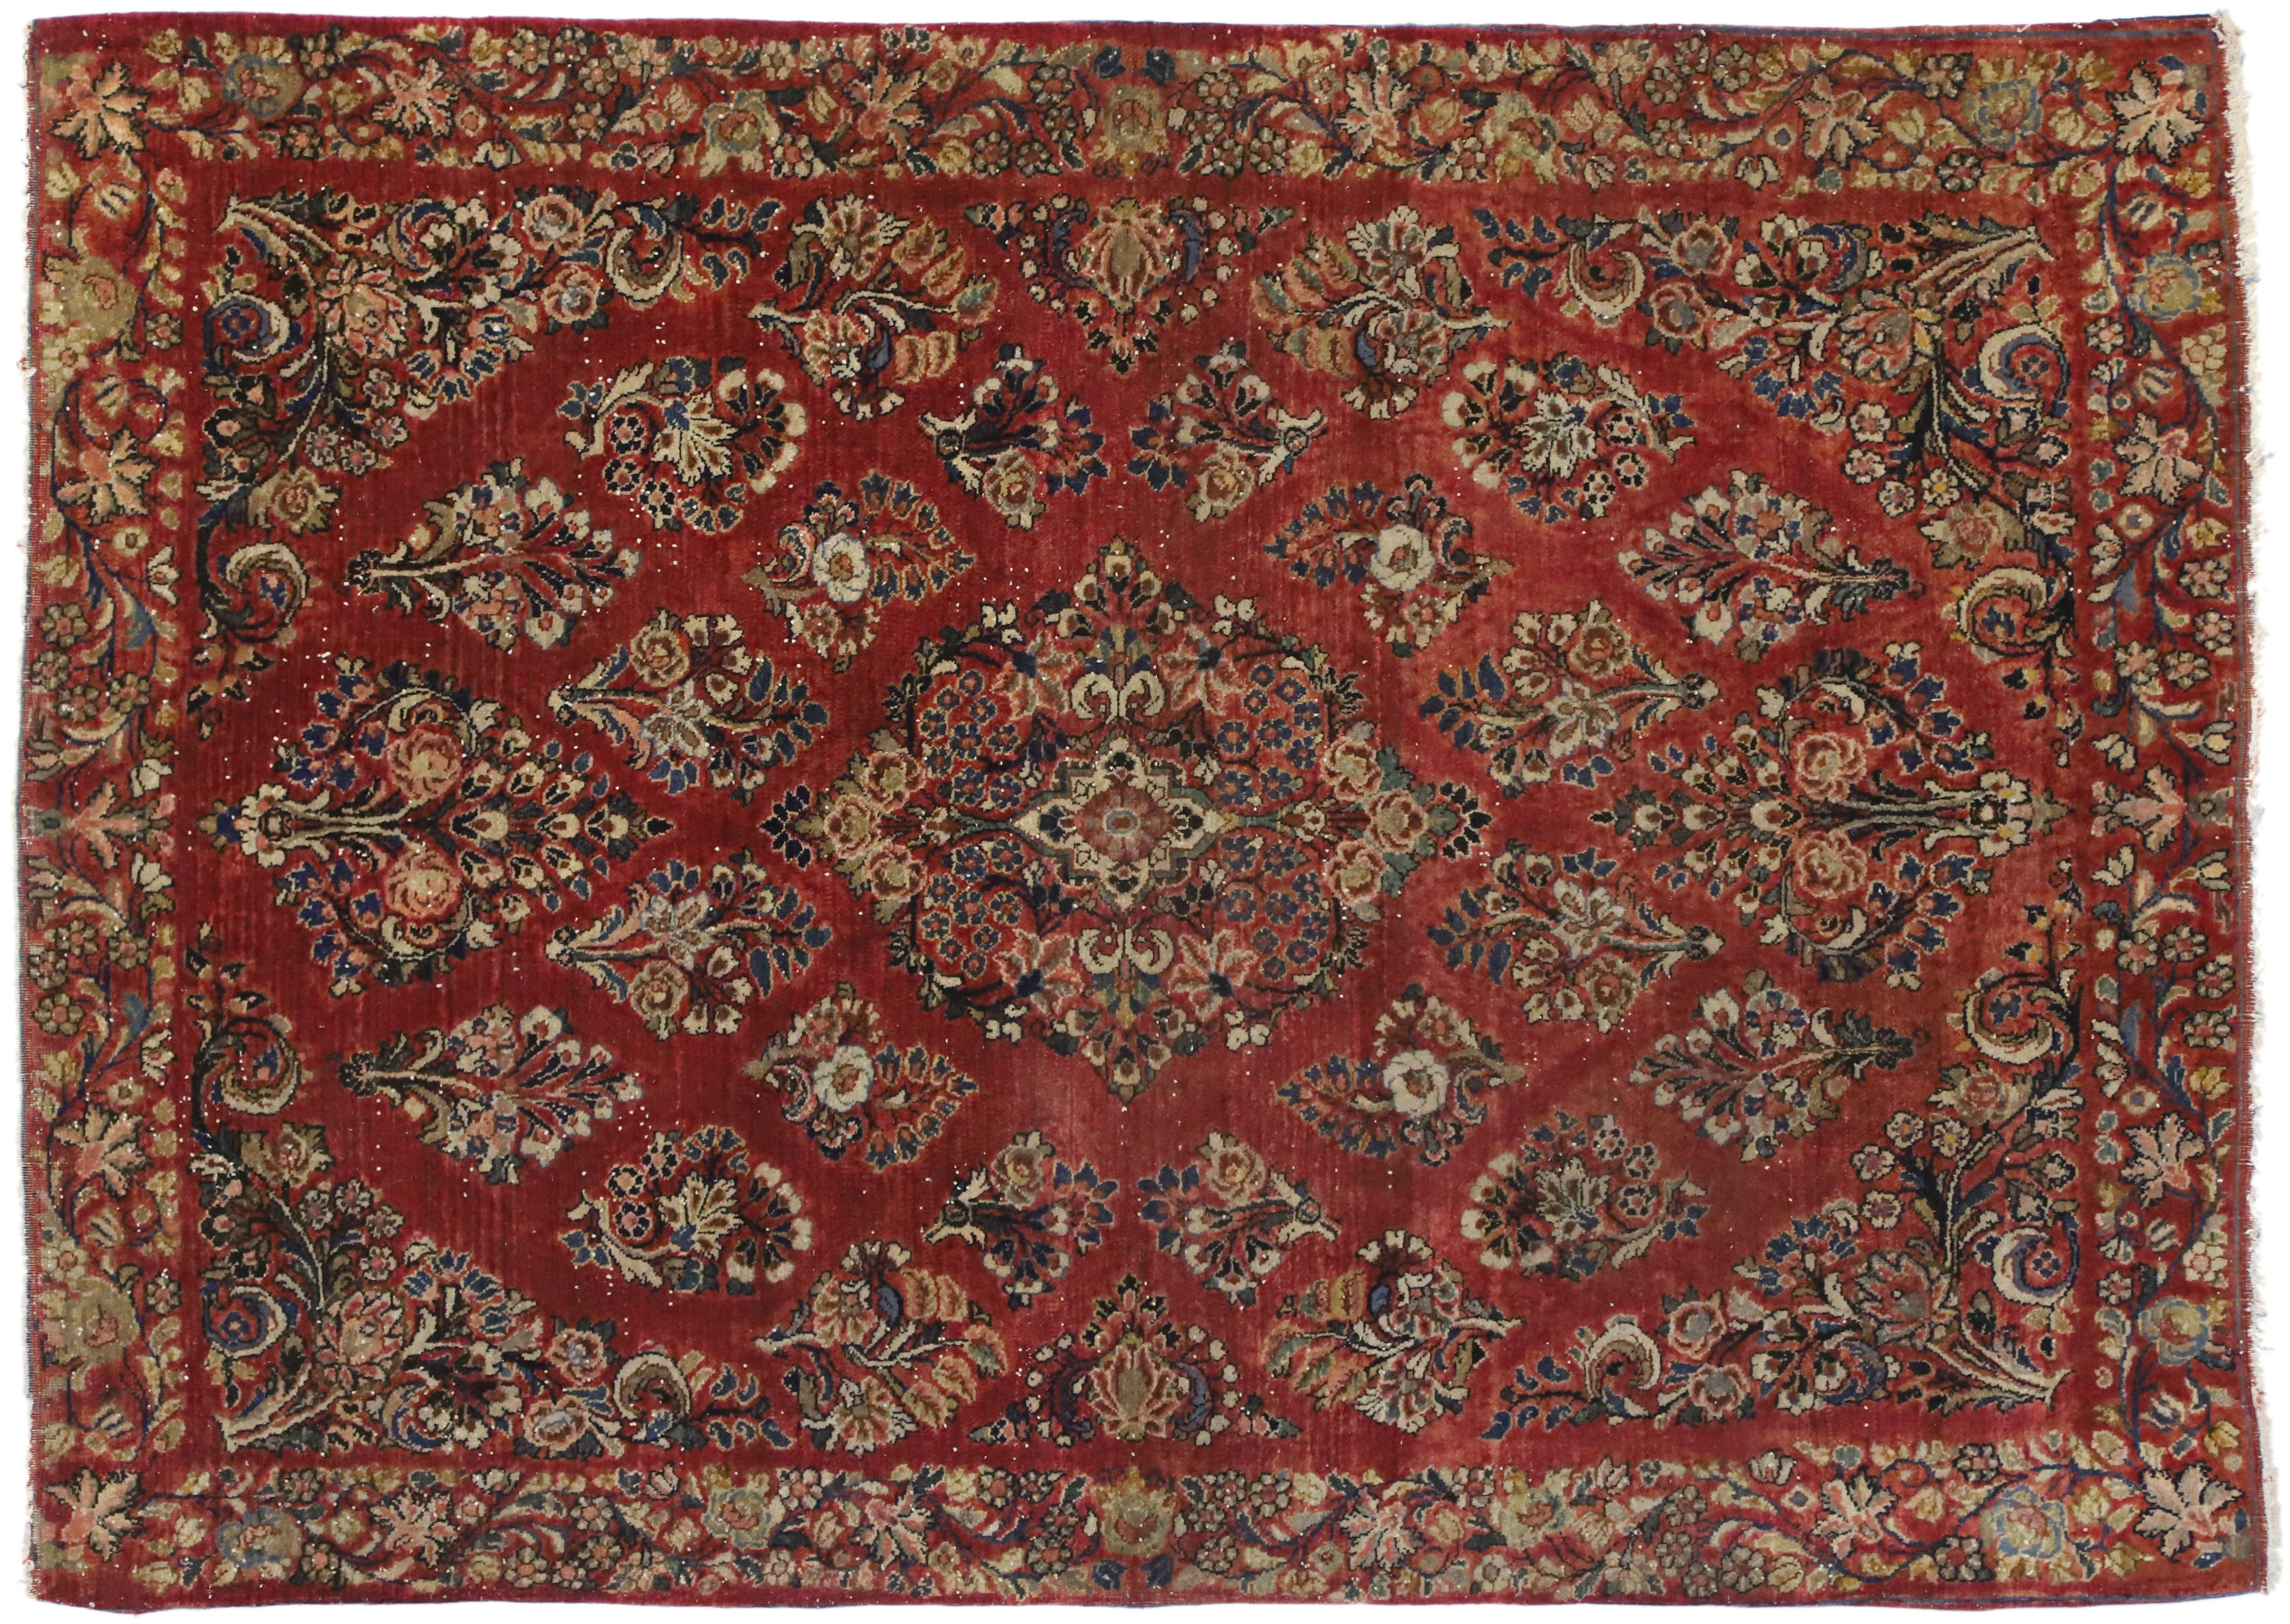 Antique Sarouk Persian Rug with Old World Victorian Style 2